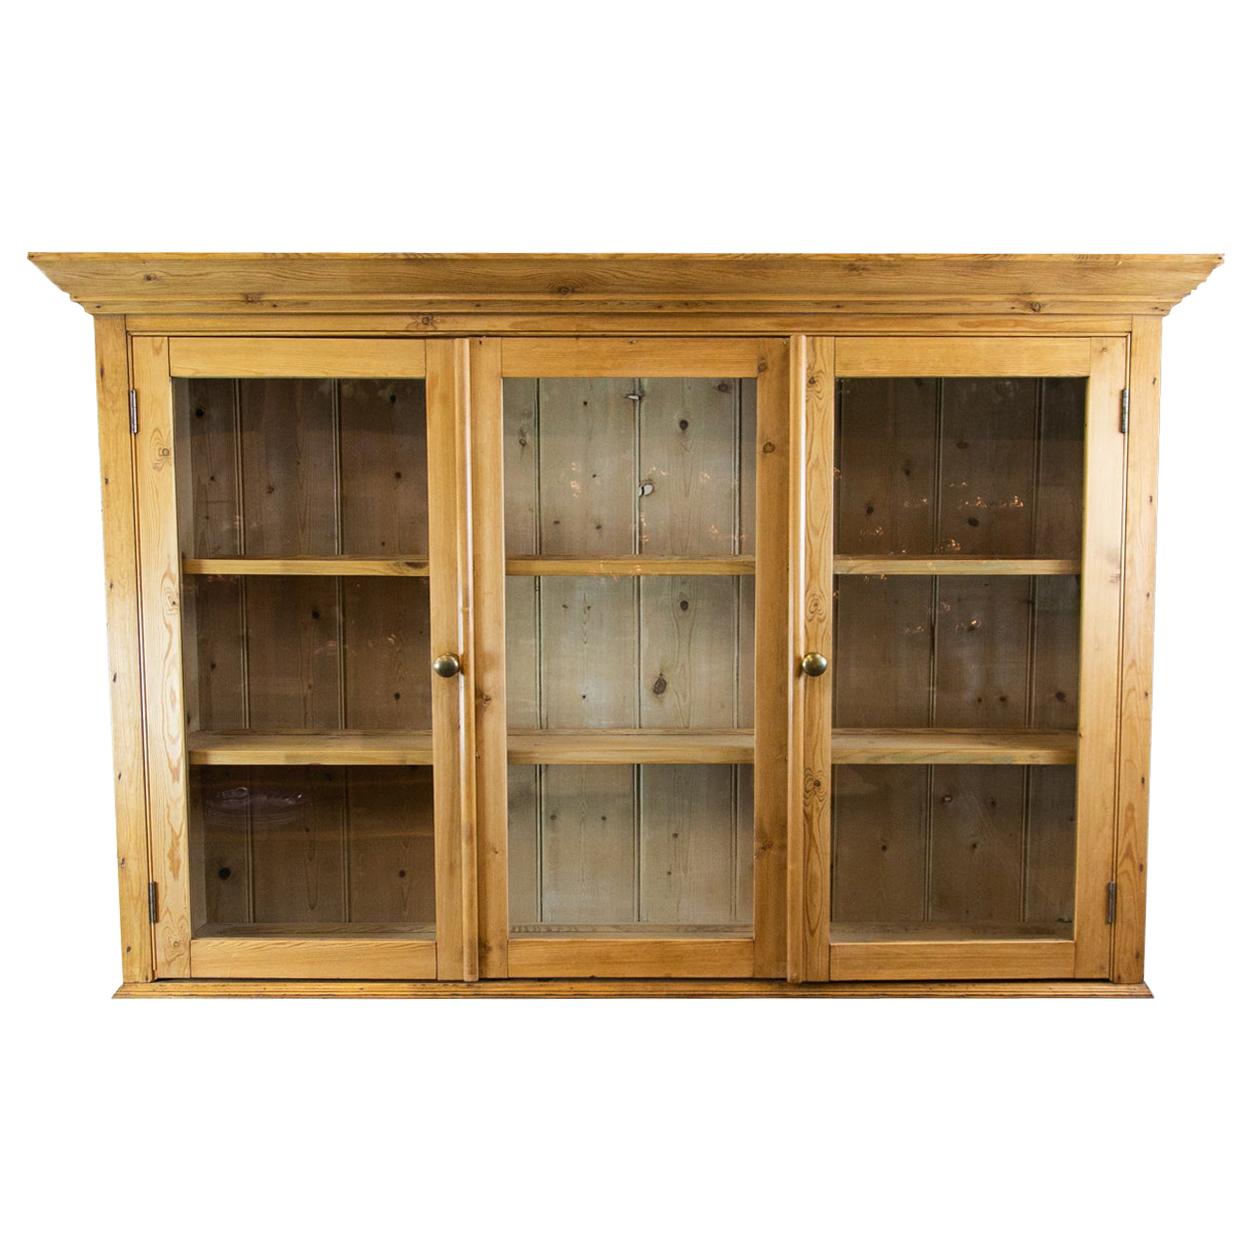 English Pine Hanging Cabinet with Glass Doors